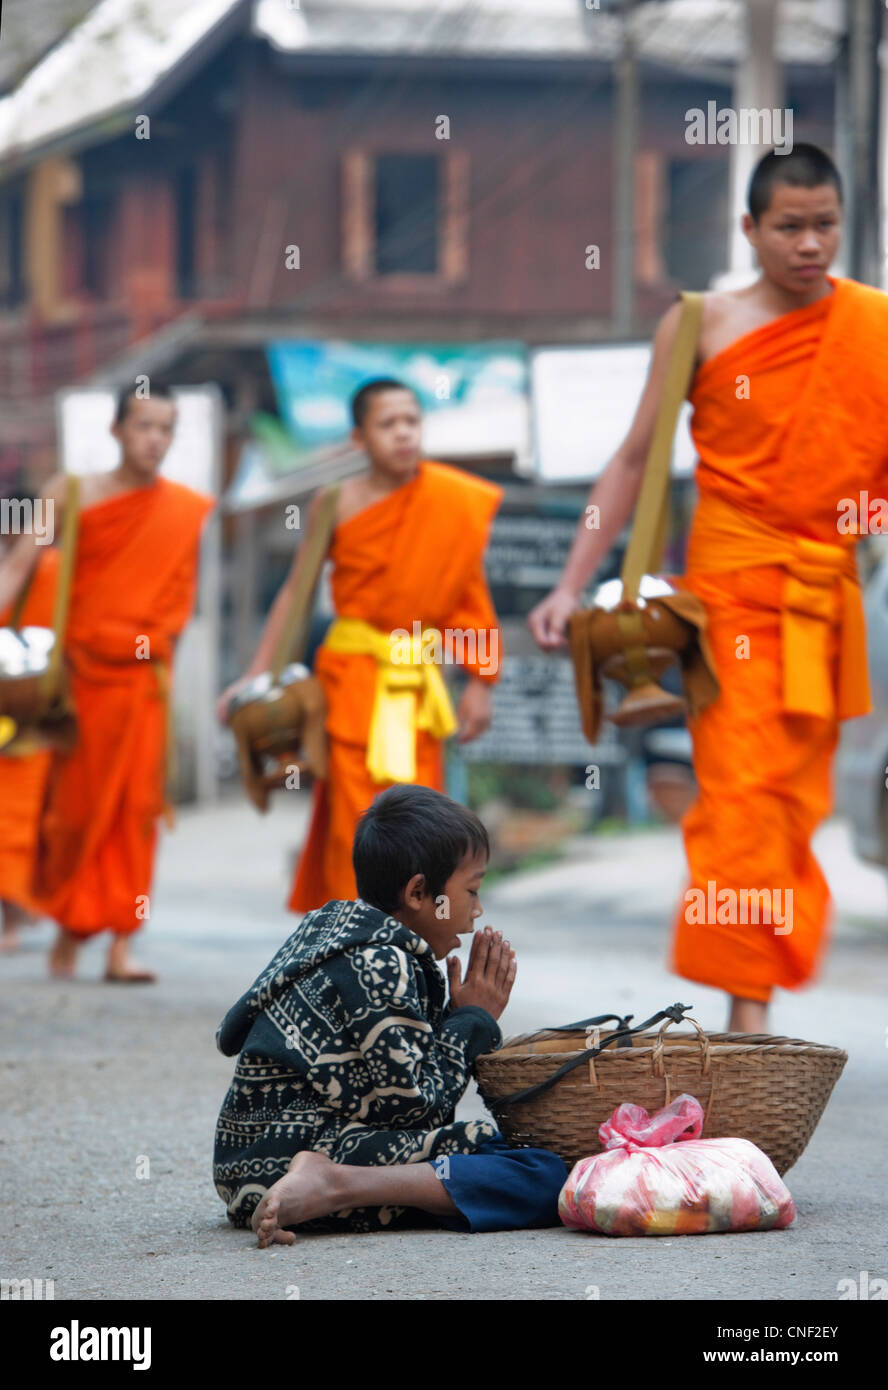 Young Lao boy begging for alms from passing Buddhist monks who have just received alms during morning alms procession Stock Photo